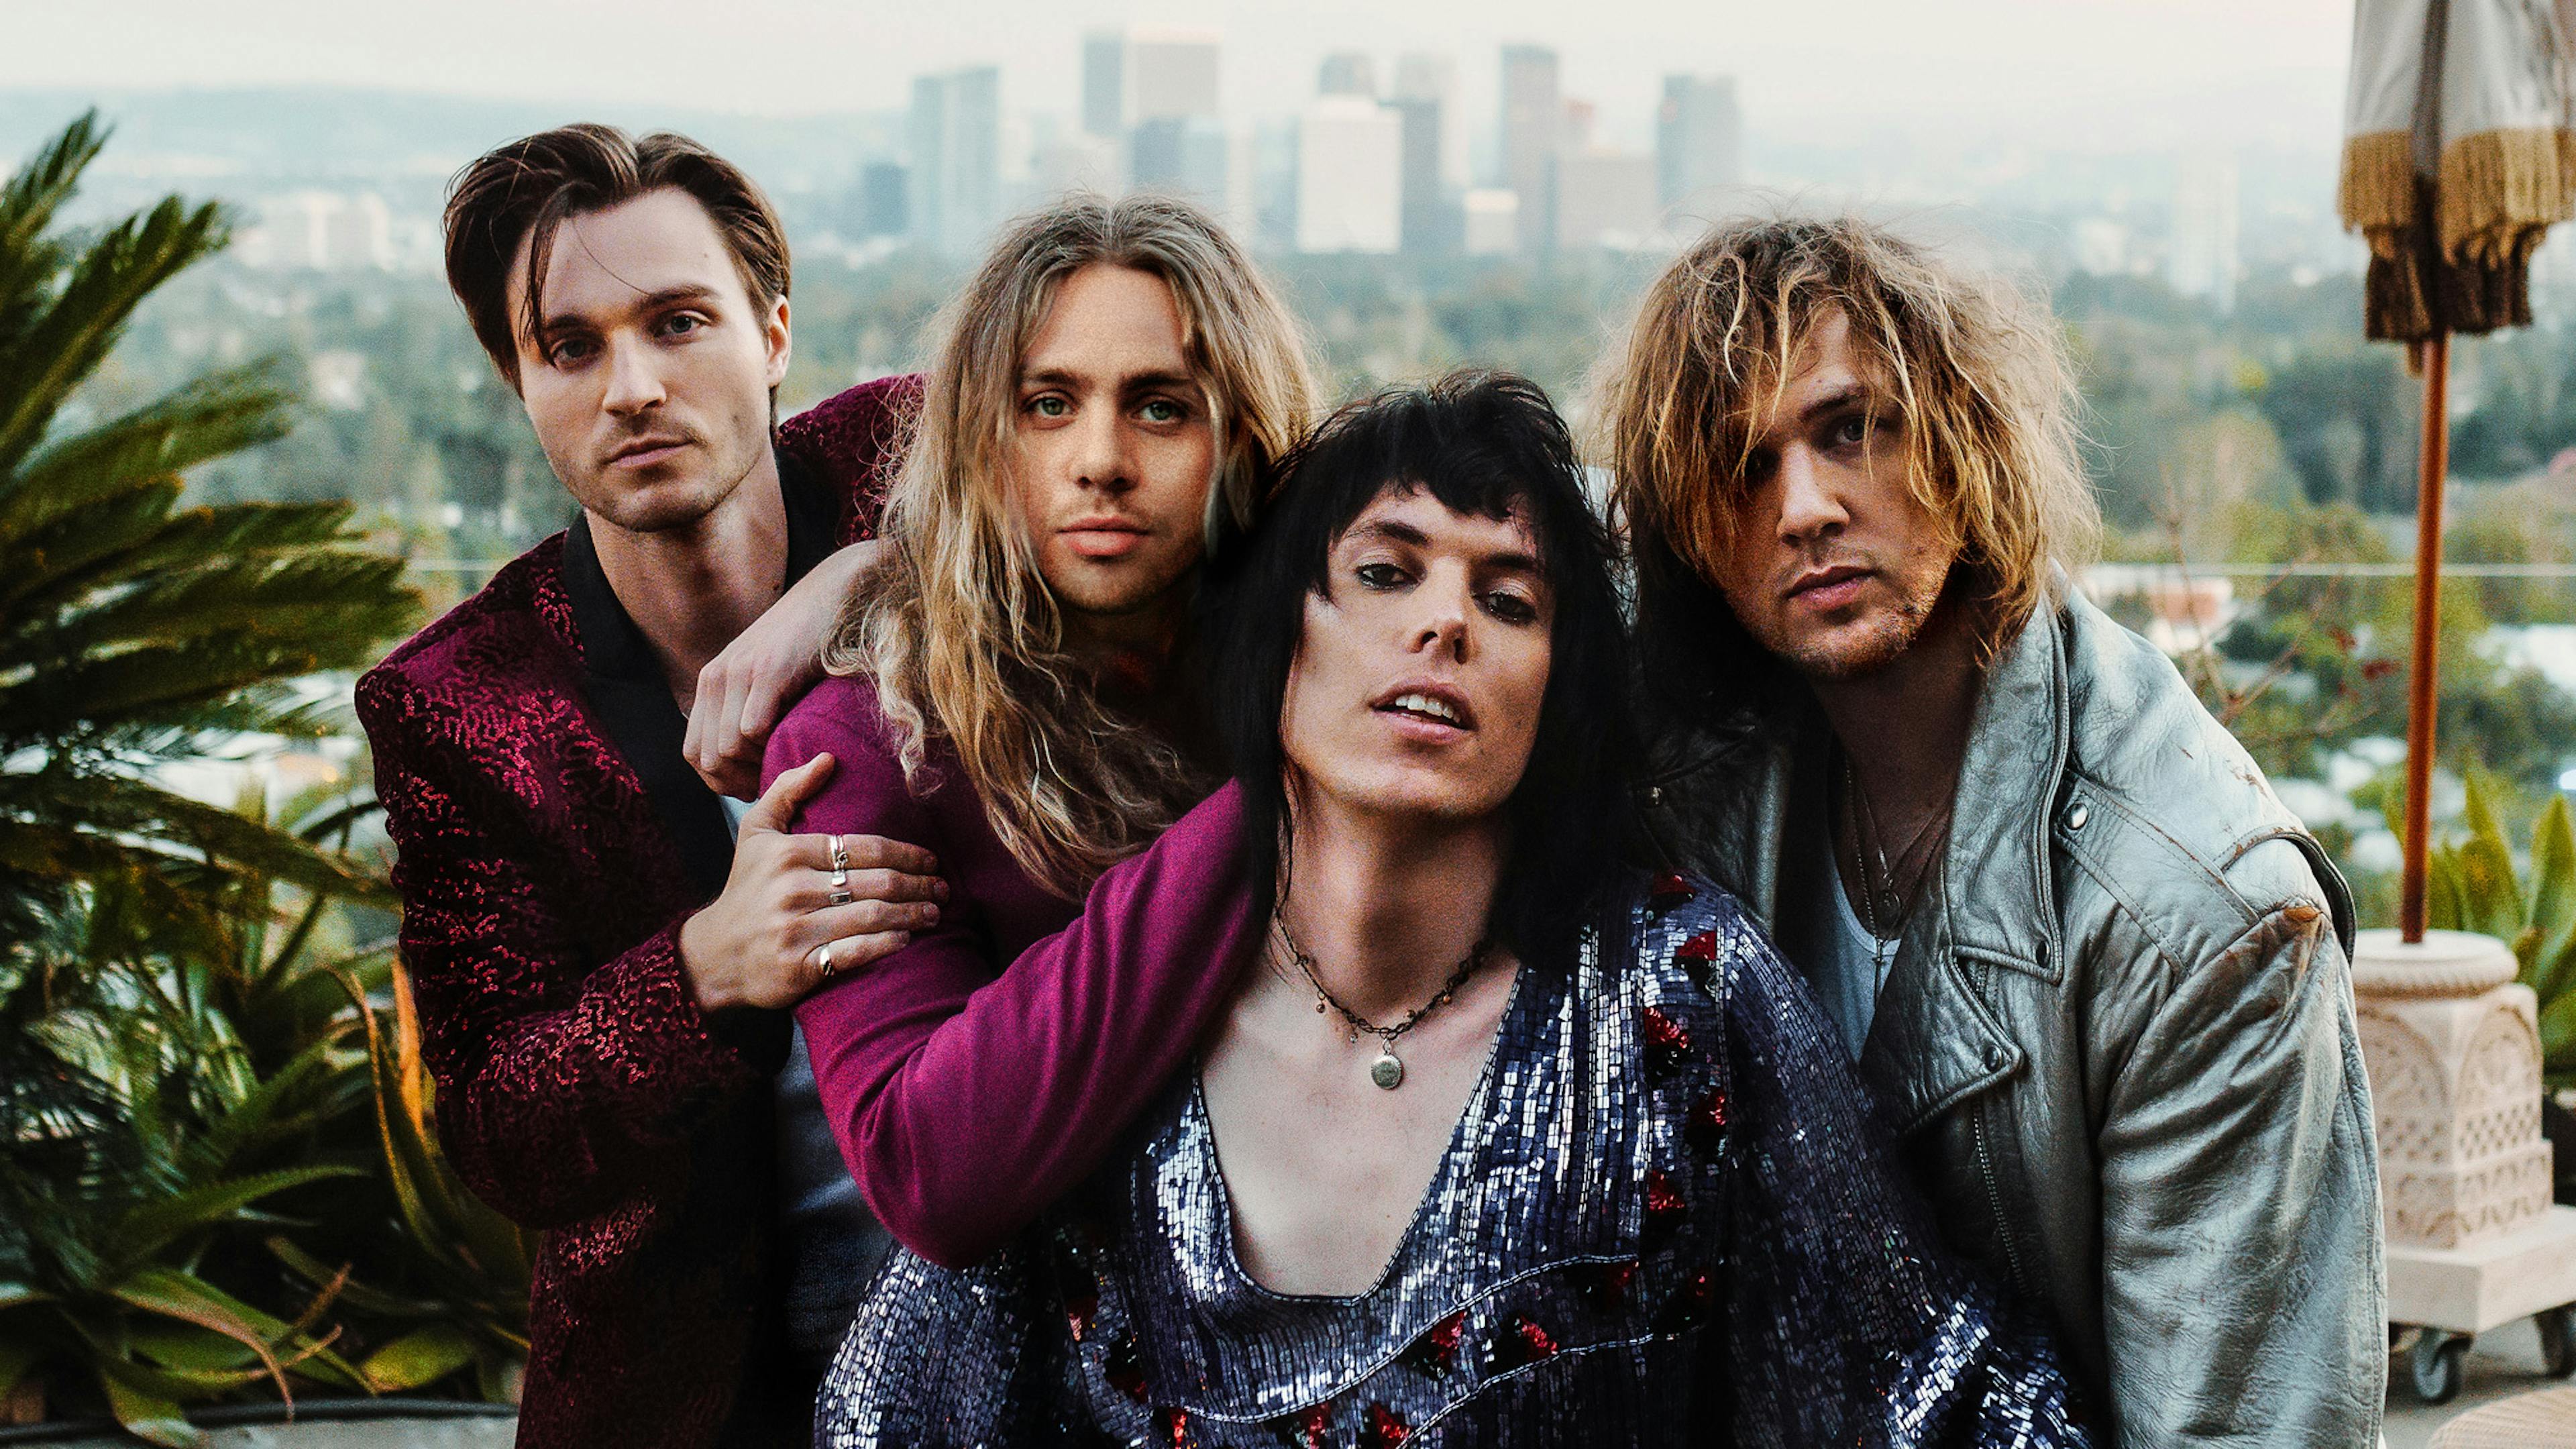 Why The Struts' New Album Strange Days Is The Record They've "Been Dying To Make"